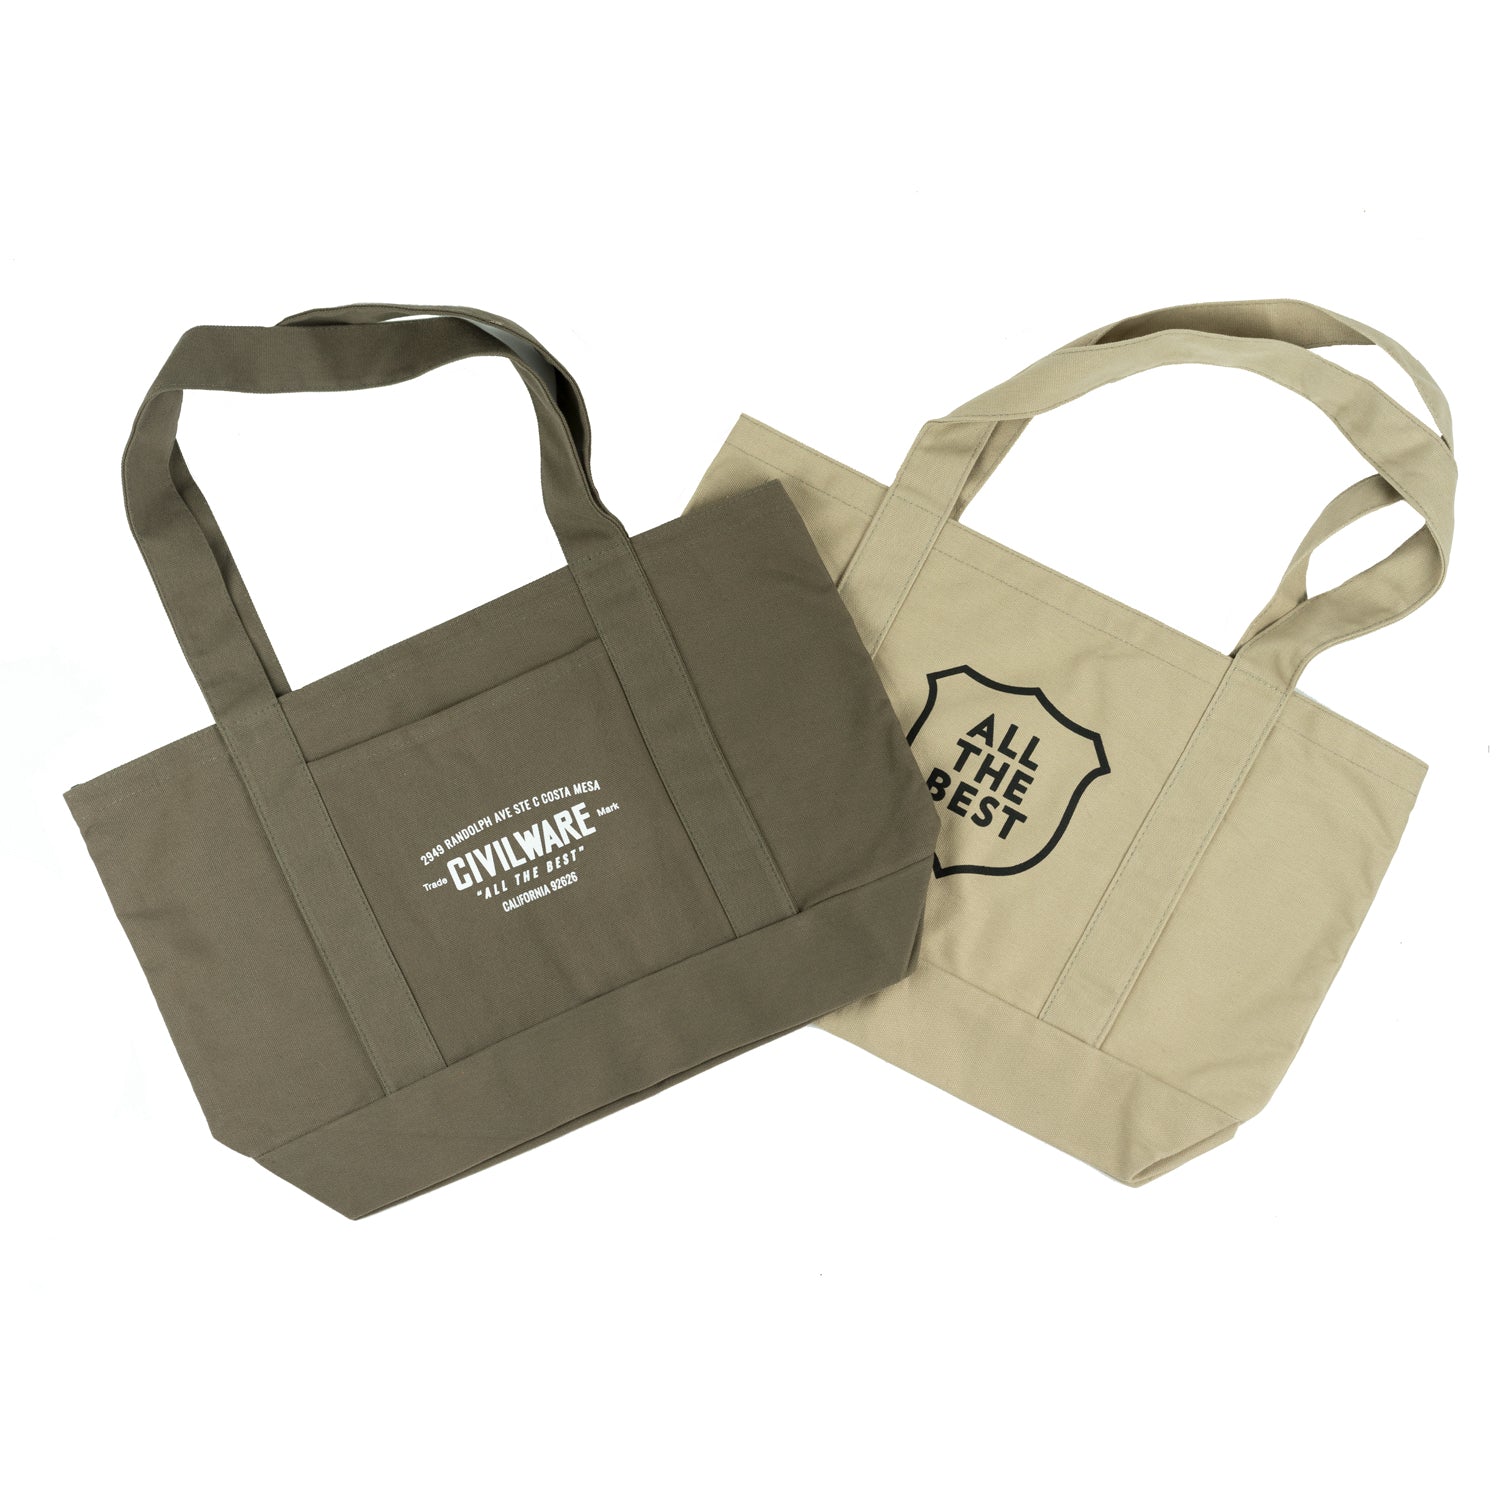 Organic Cotton Carry Bags Manufacturers in India‎